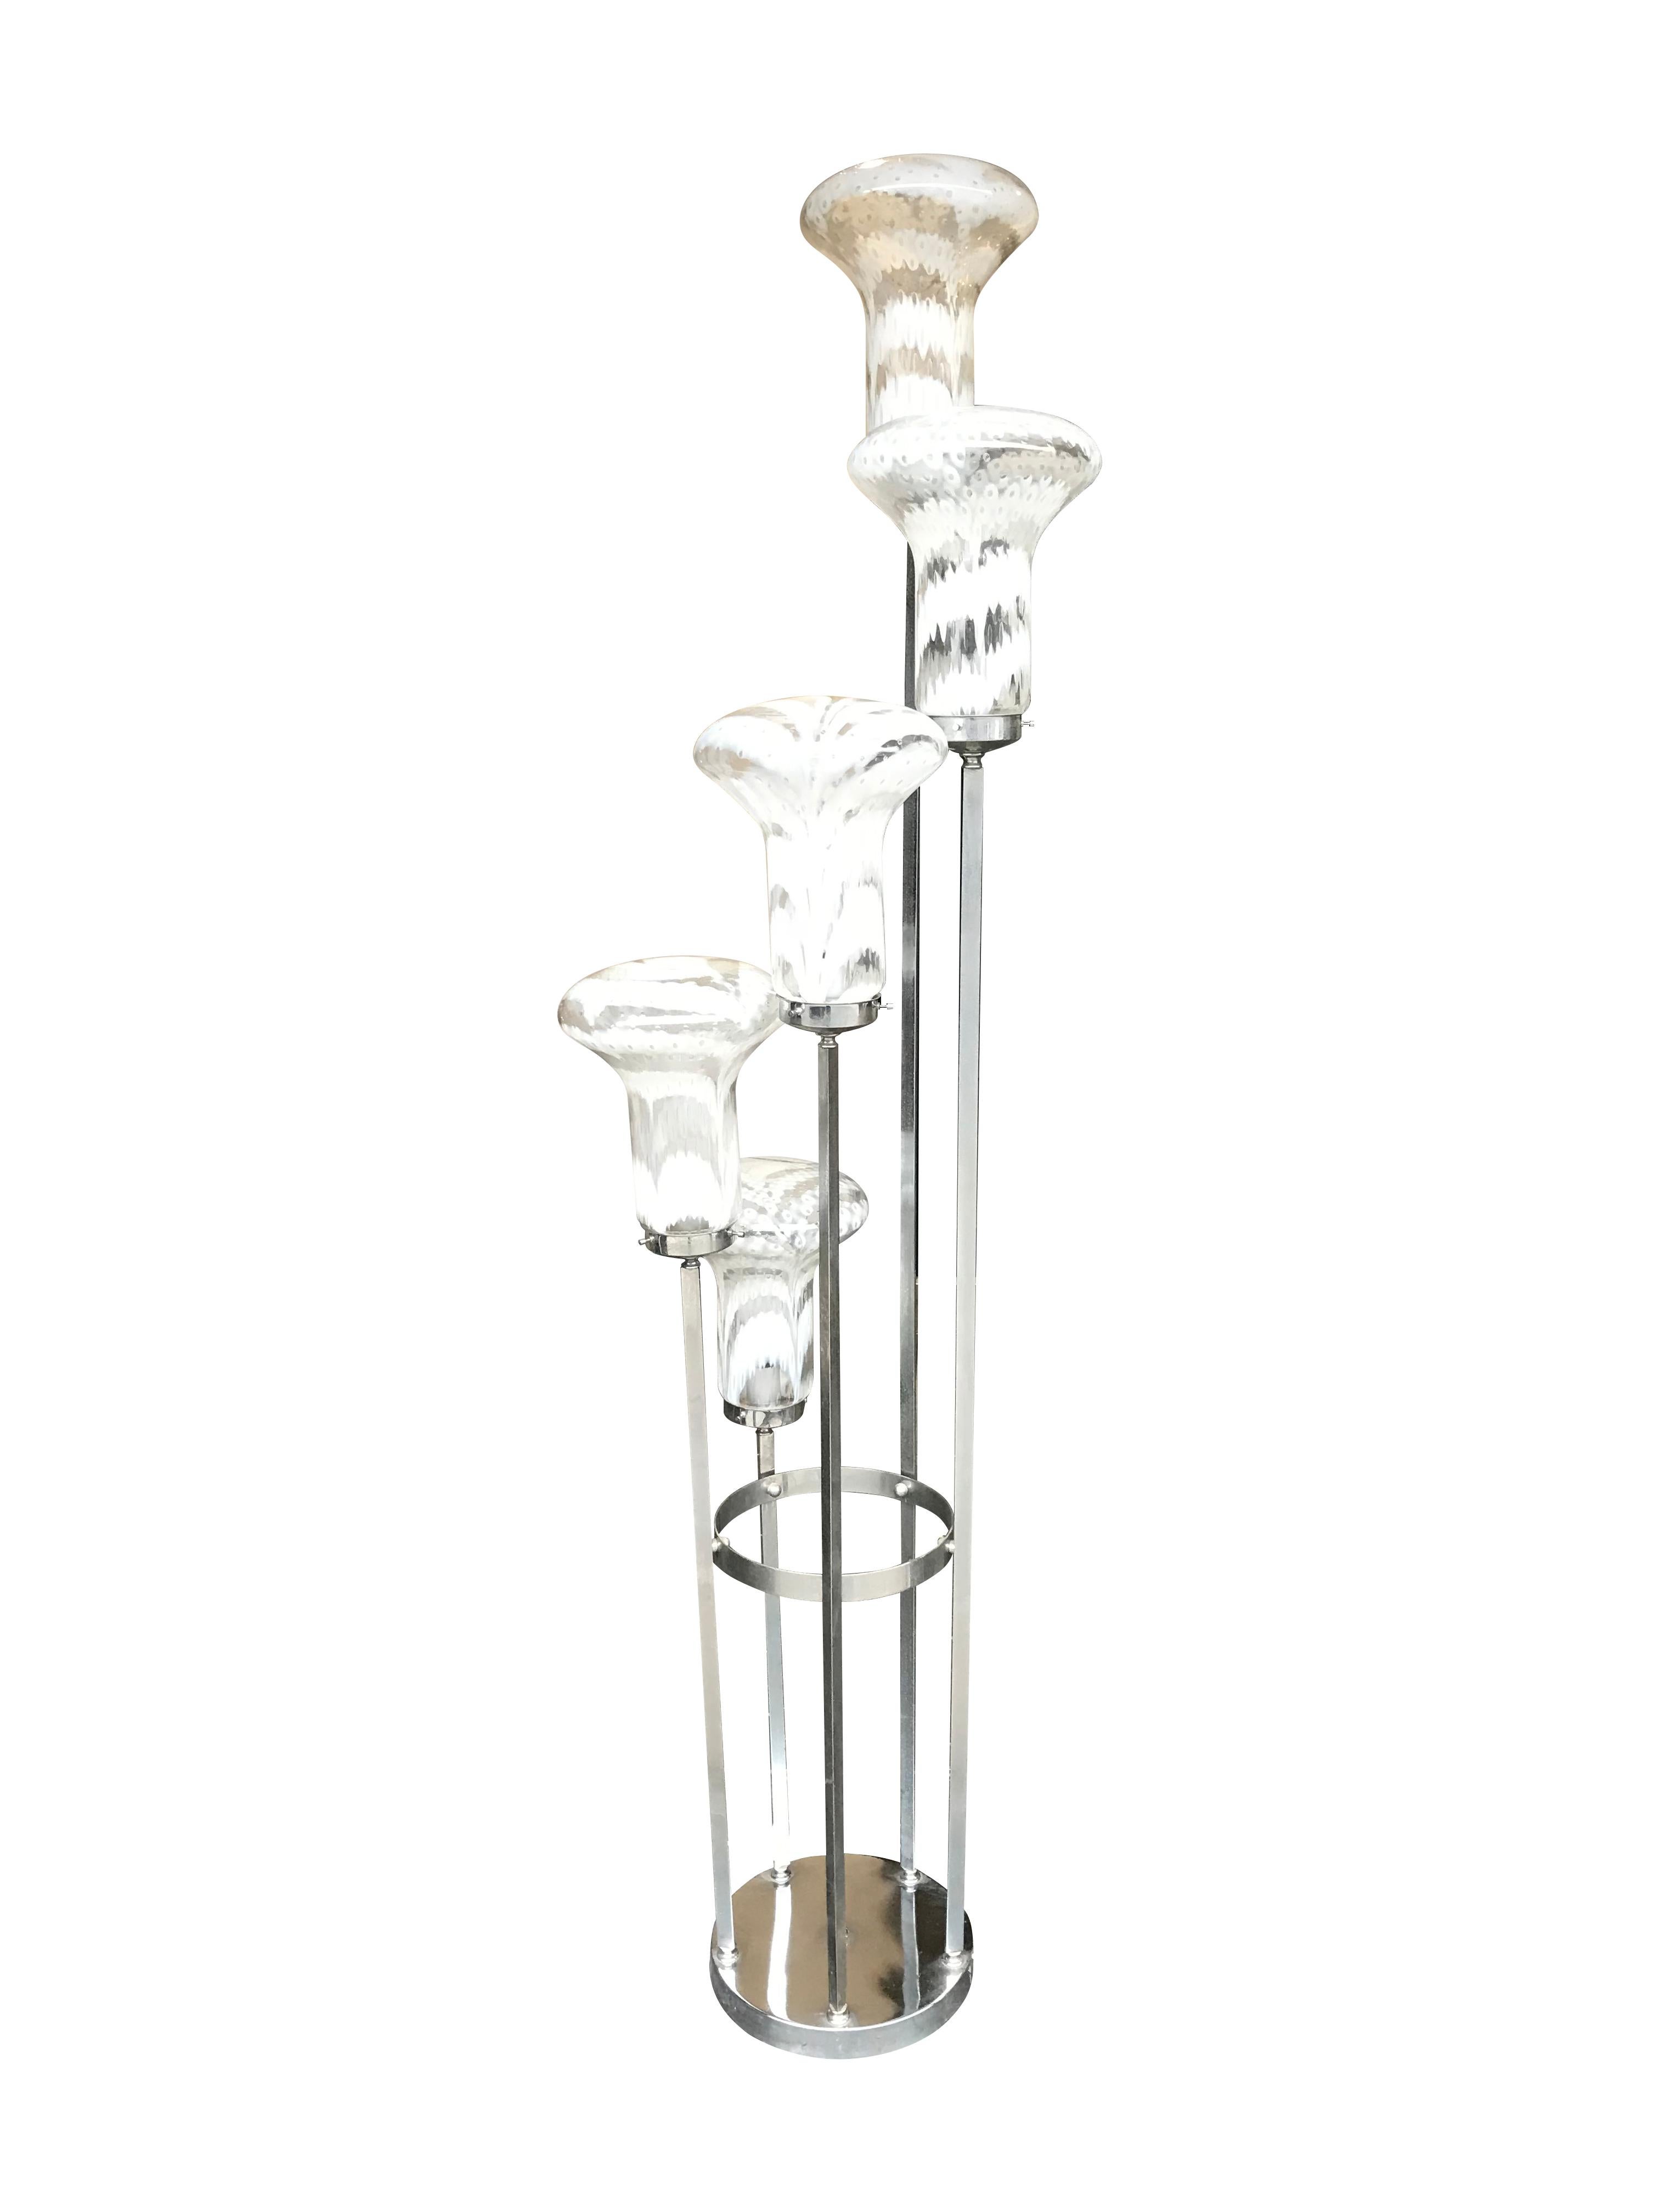 An unusual Italian floor lamp with five large white and clear swirling patterned Murano glass shades. All fixed on a circular chrome base. Re wired with antique silver cord flex, foot switch and PAT tested.